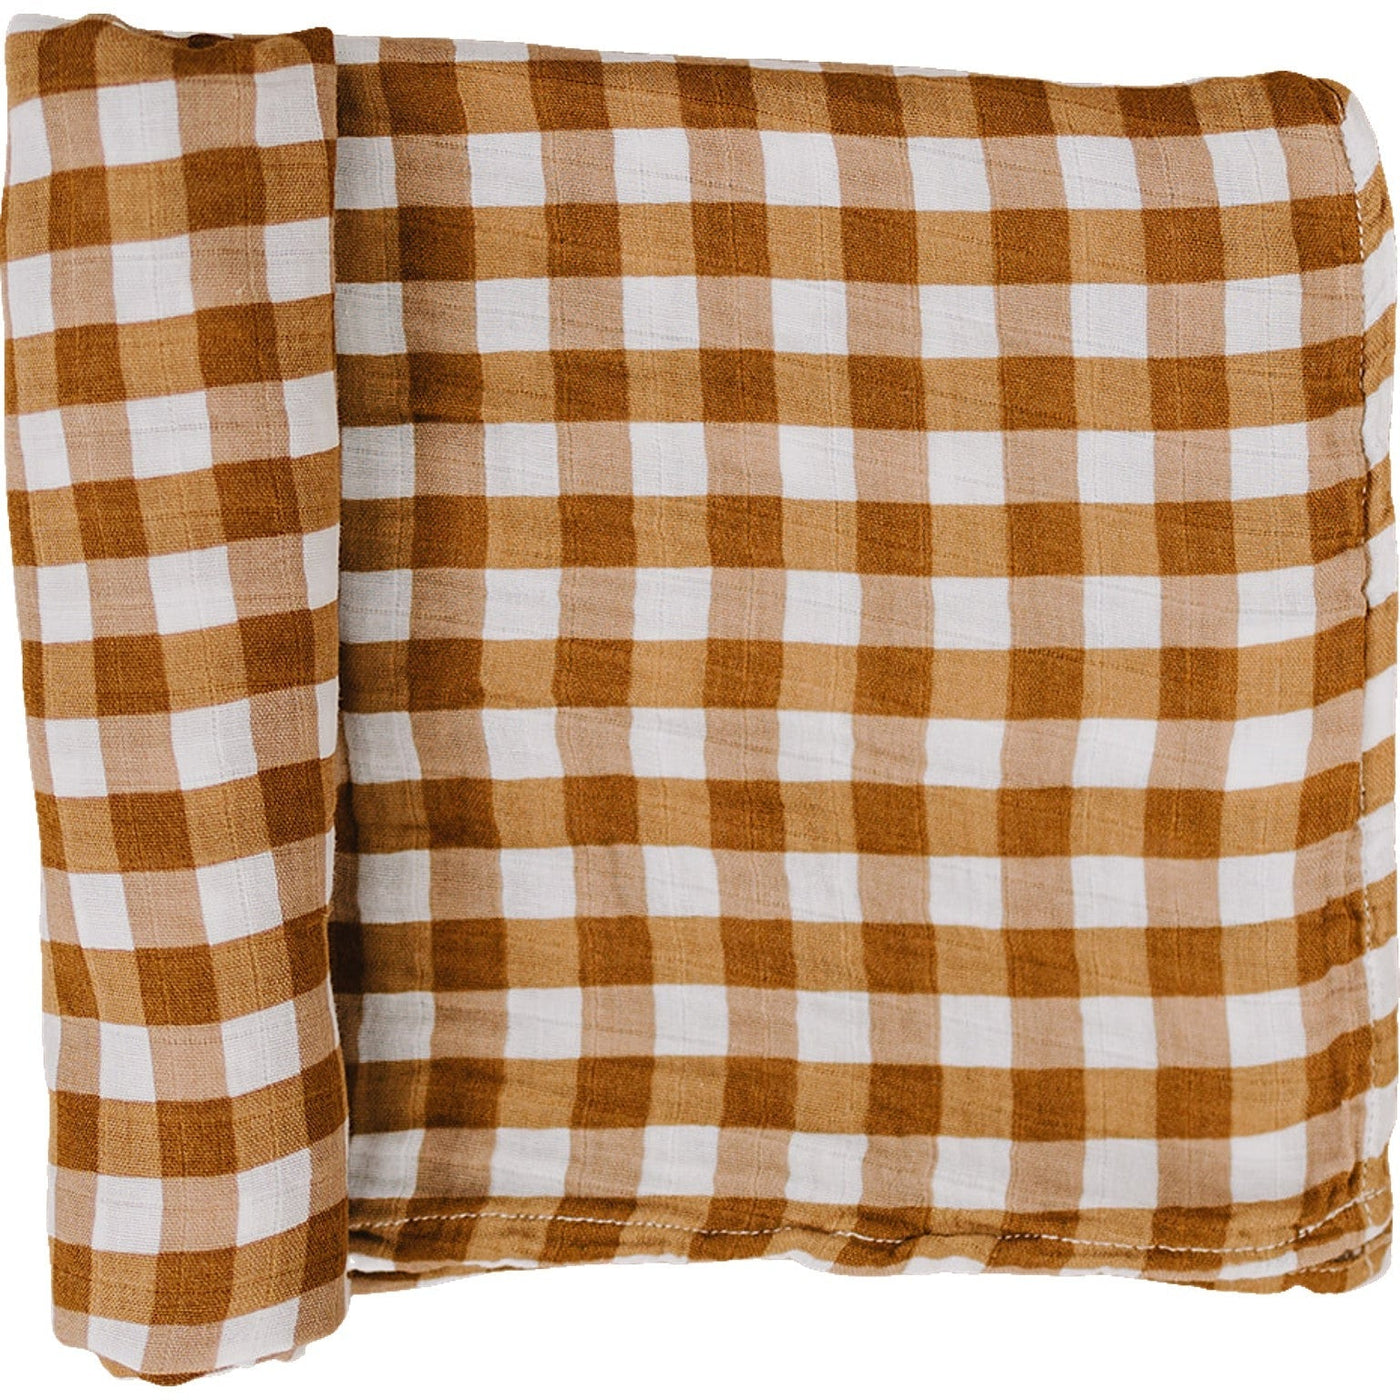 a brown and white plaid blanket